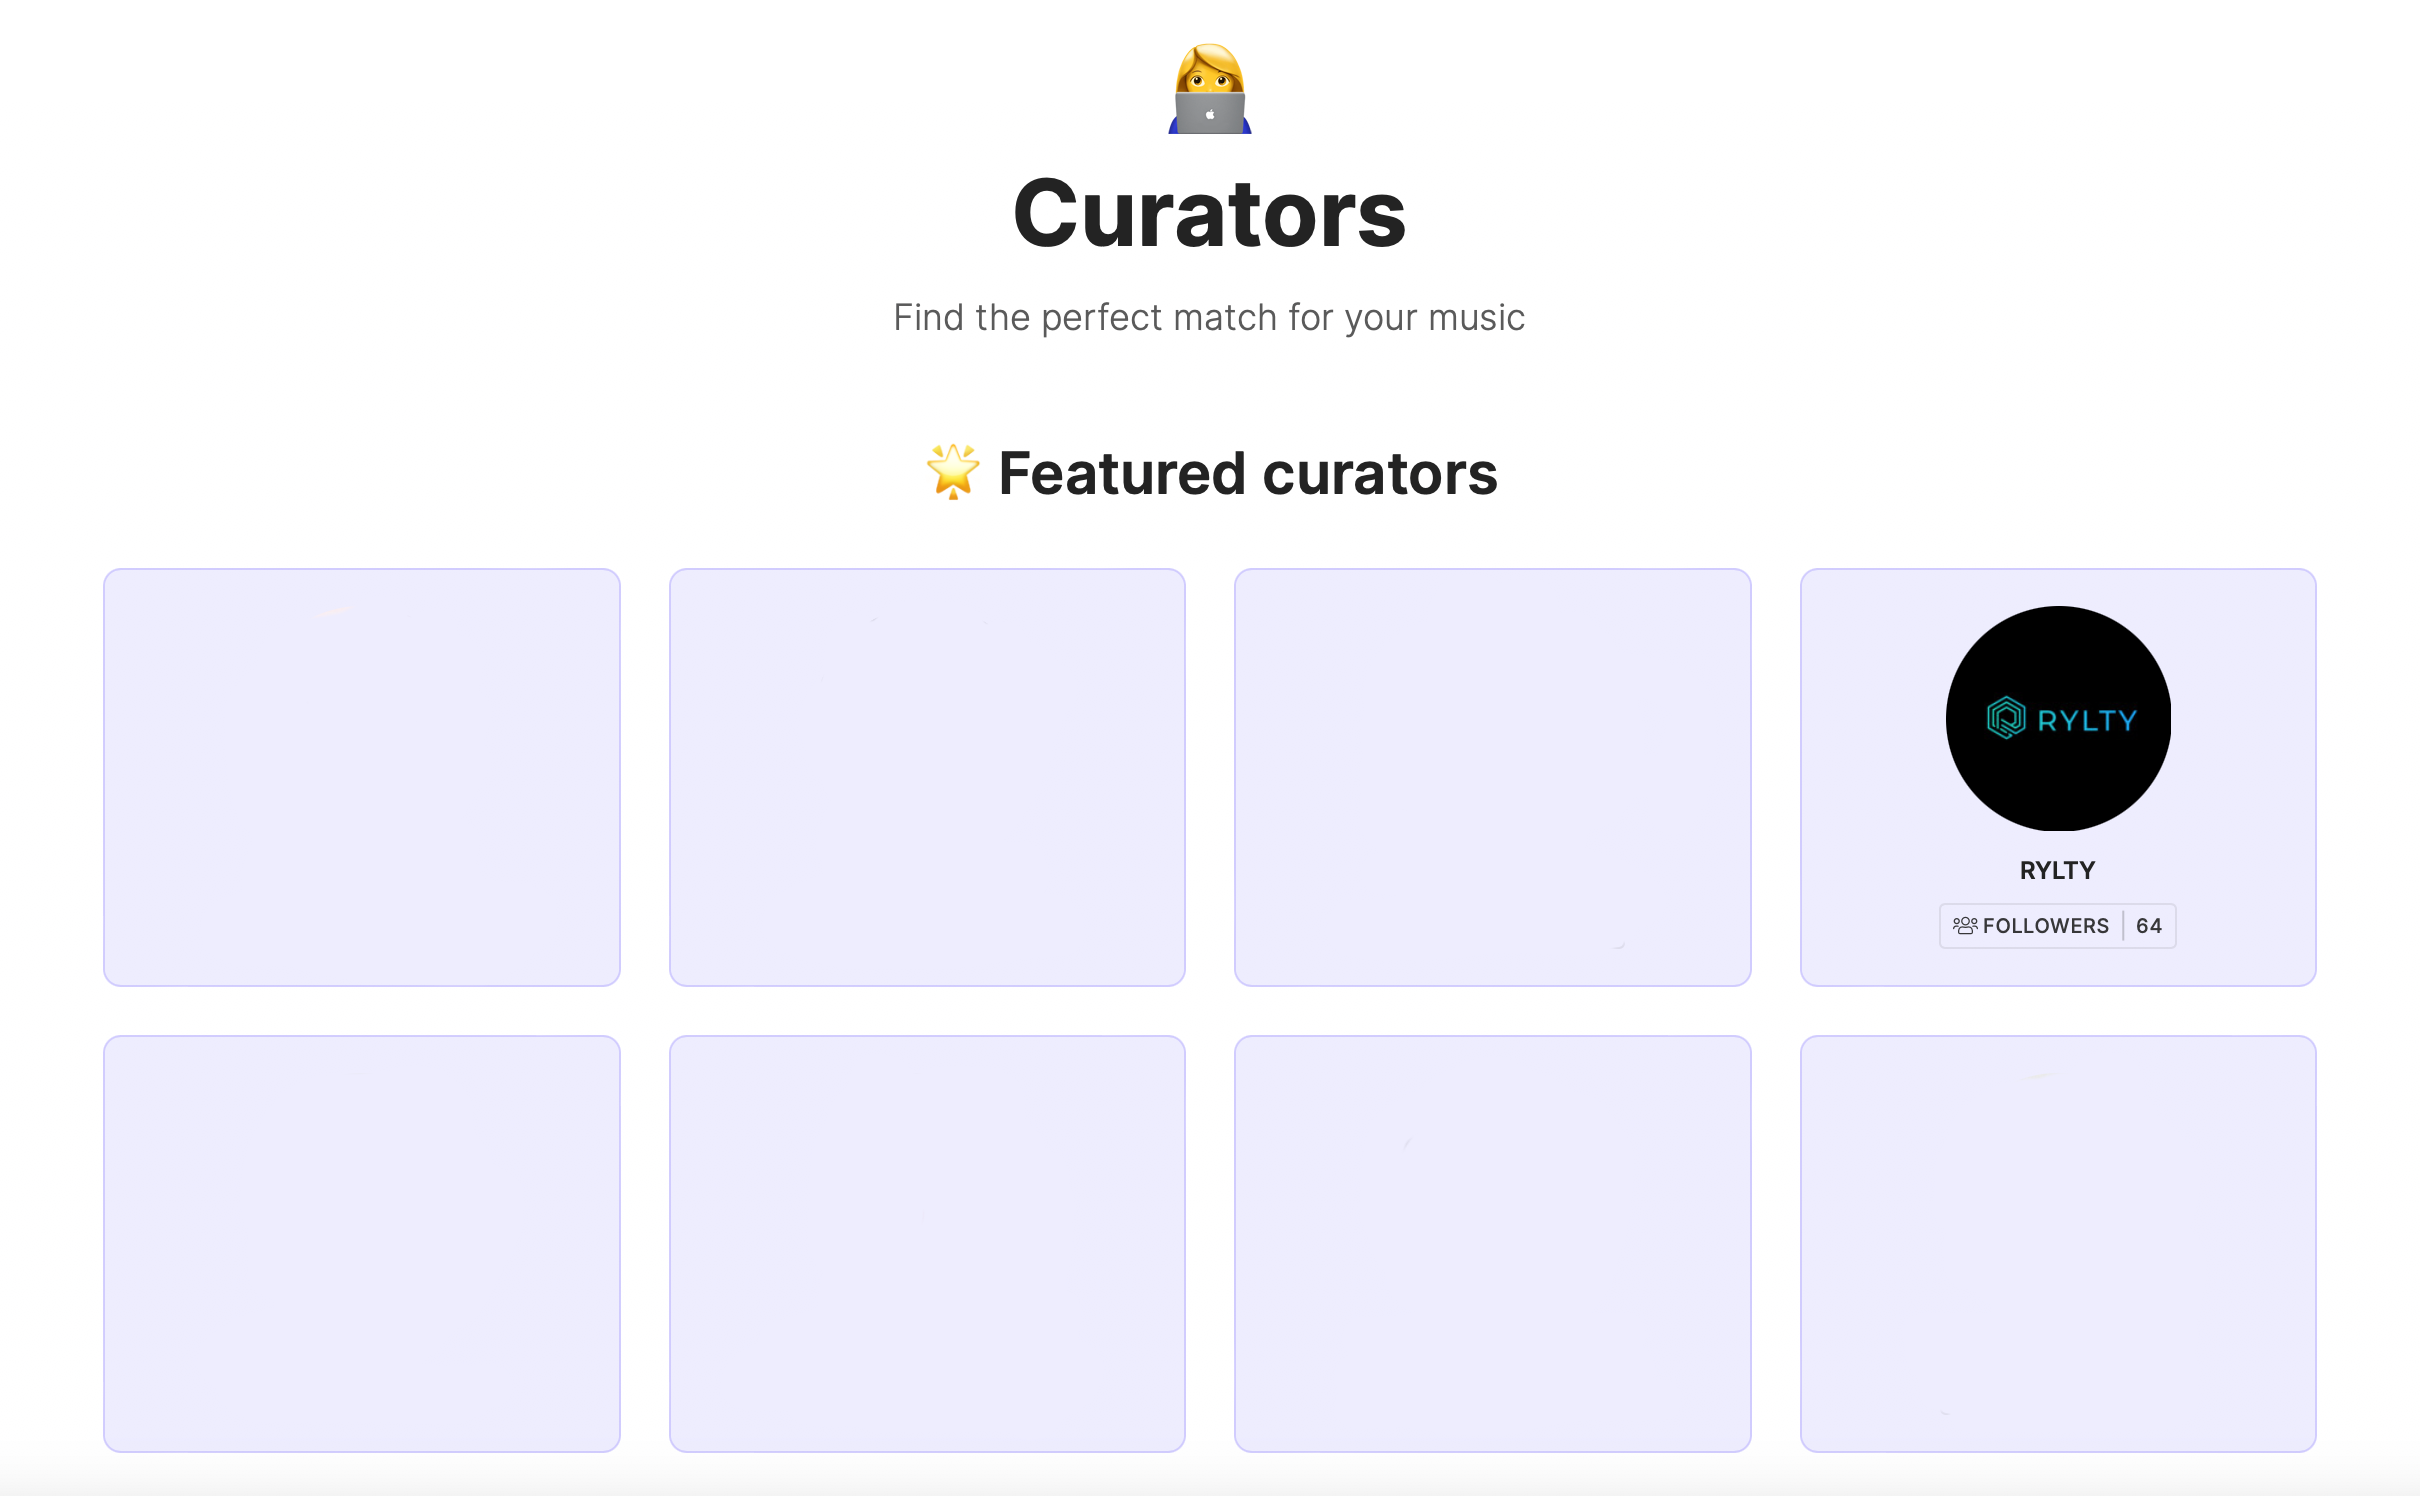 RYLTY is the Curator of the Month on Matchfy.io